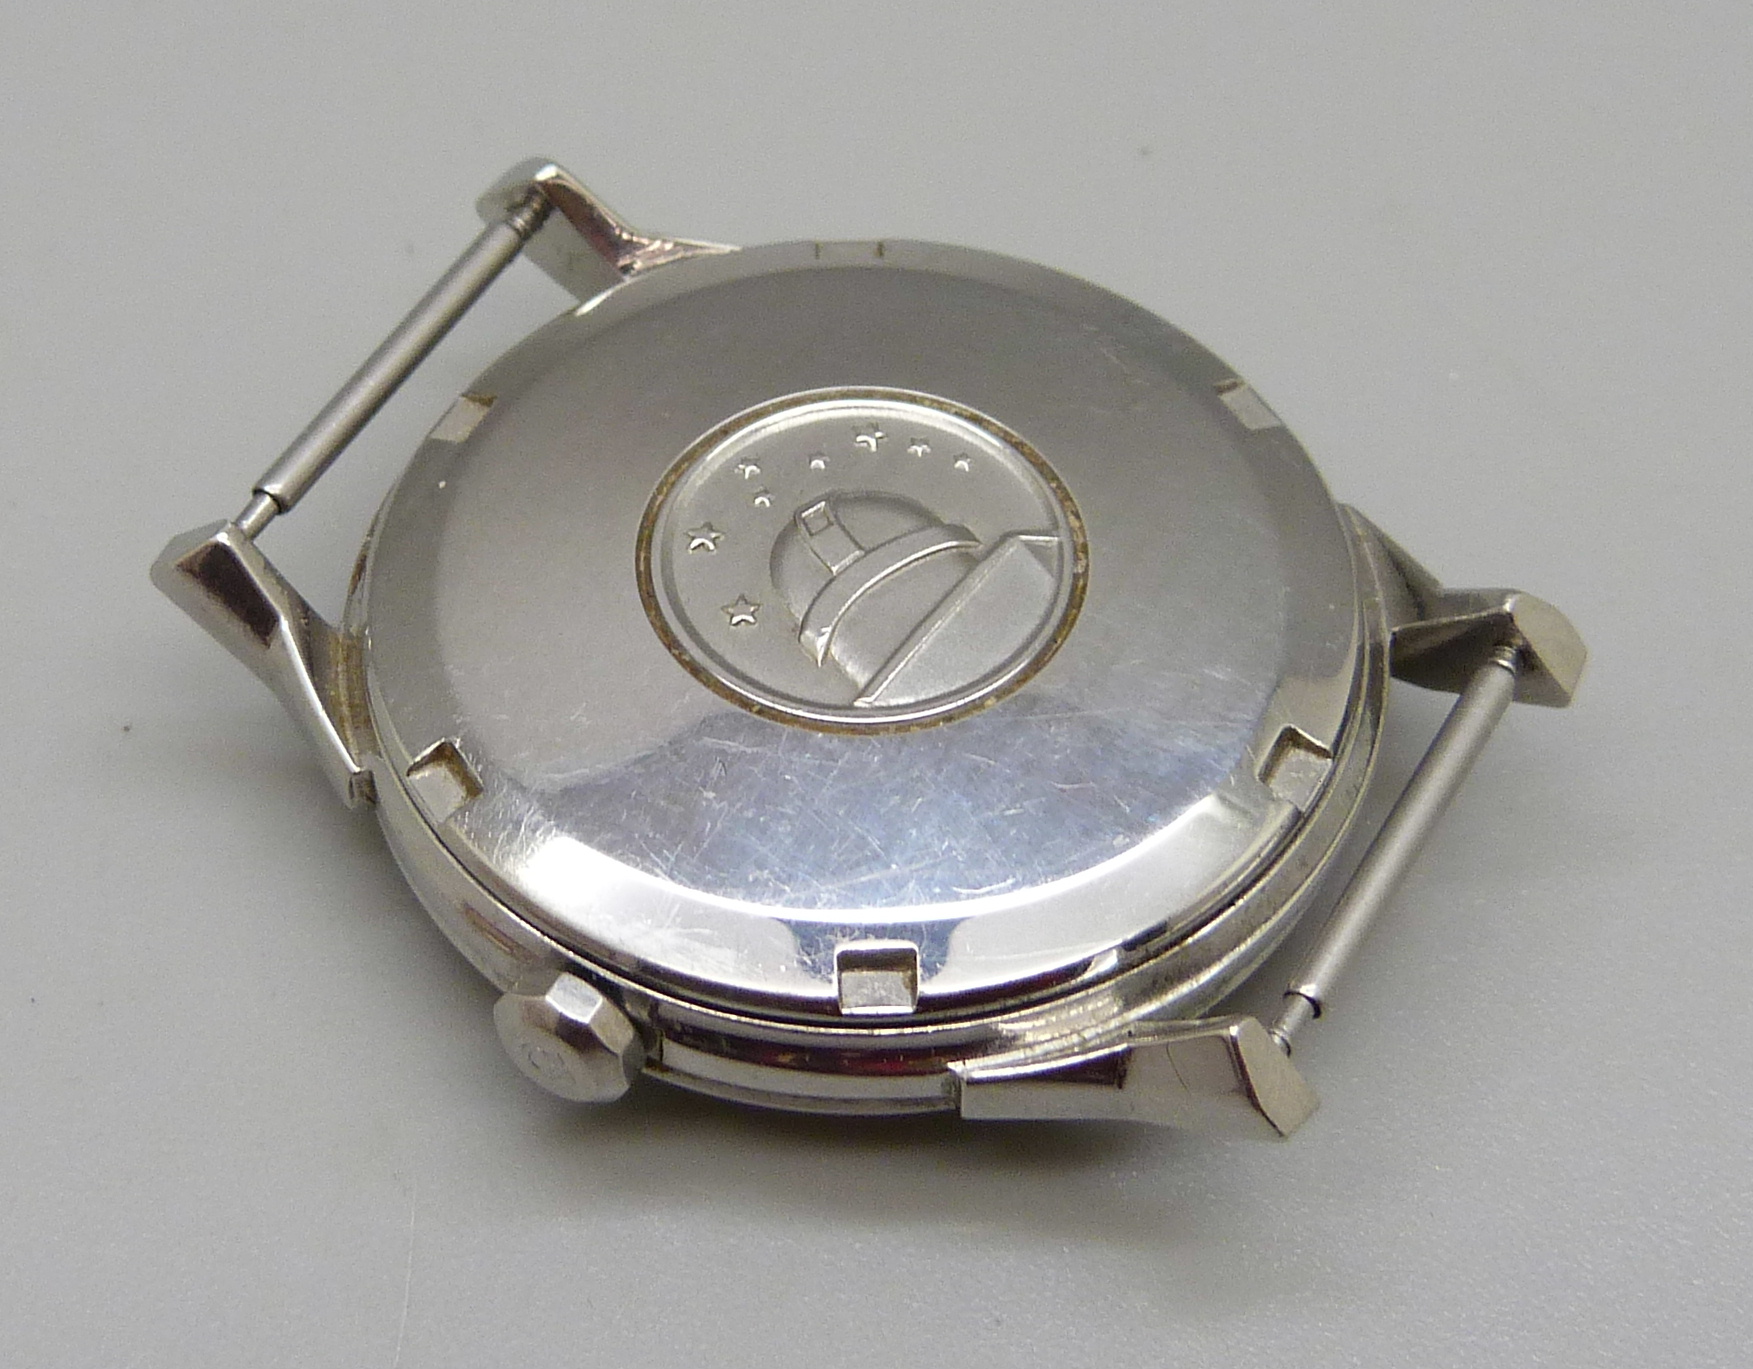 An Omega Constellation automatic chronometer wristwatch with pie pan dial, with original Omega glass - Image 4 of 7